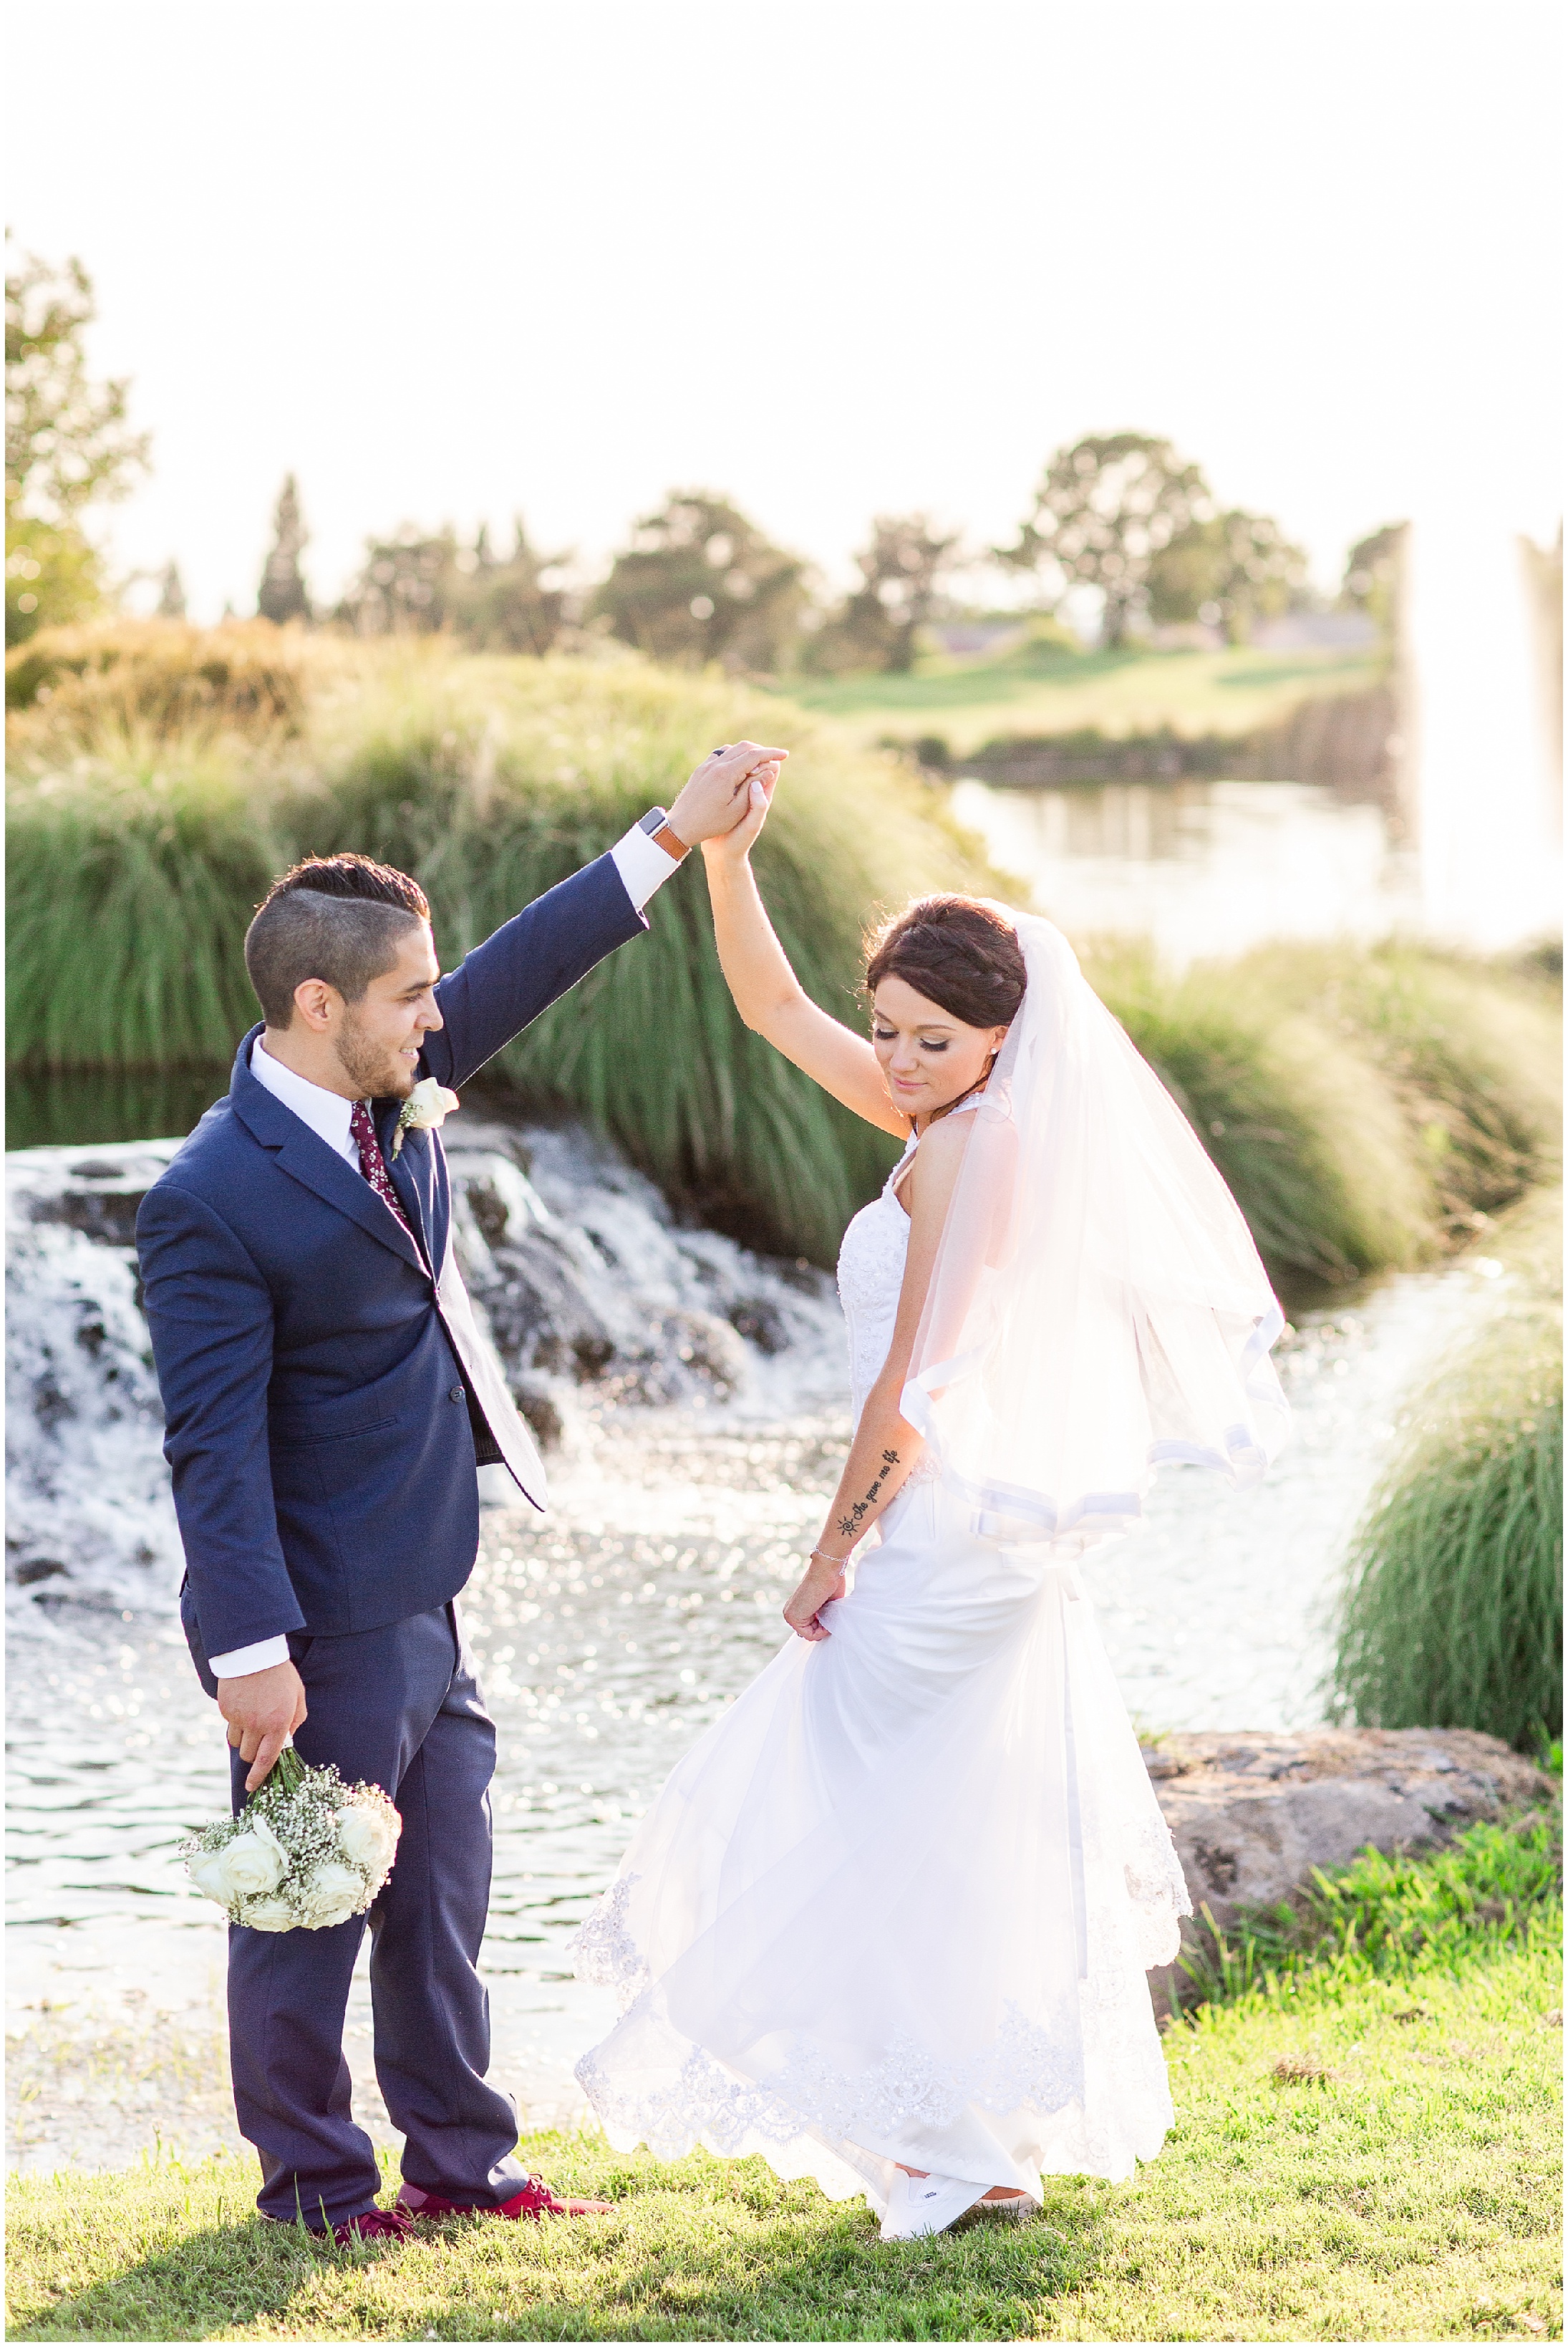 Bride and Groom Twirling in the Sunset Glow | Kalli + Madison